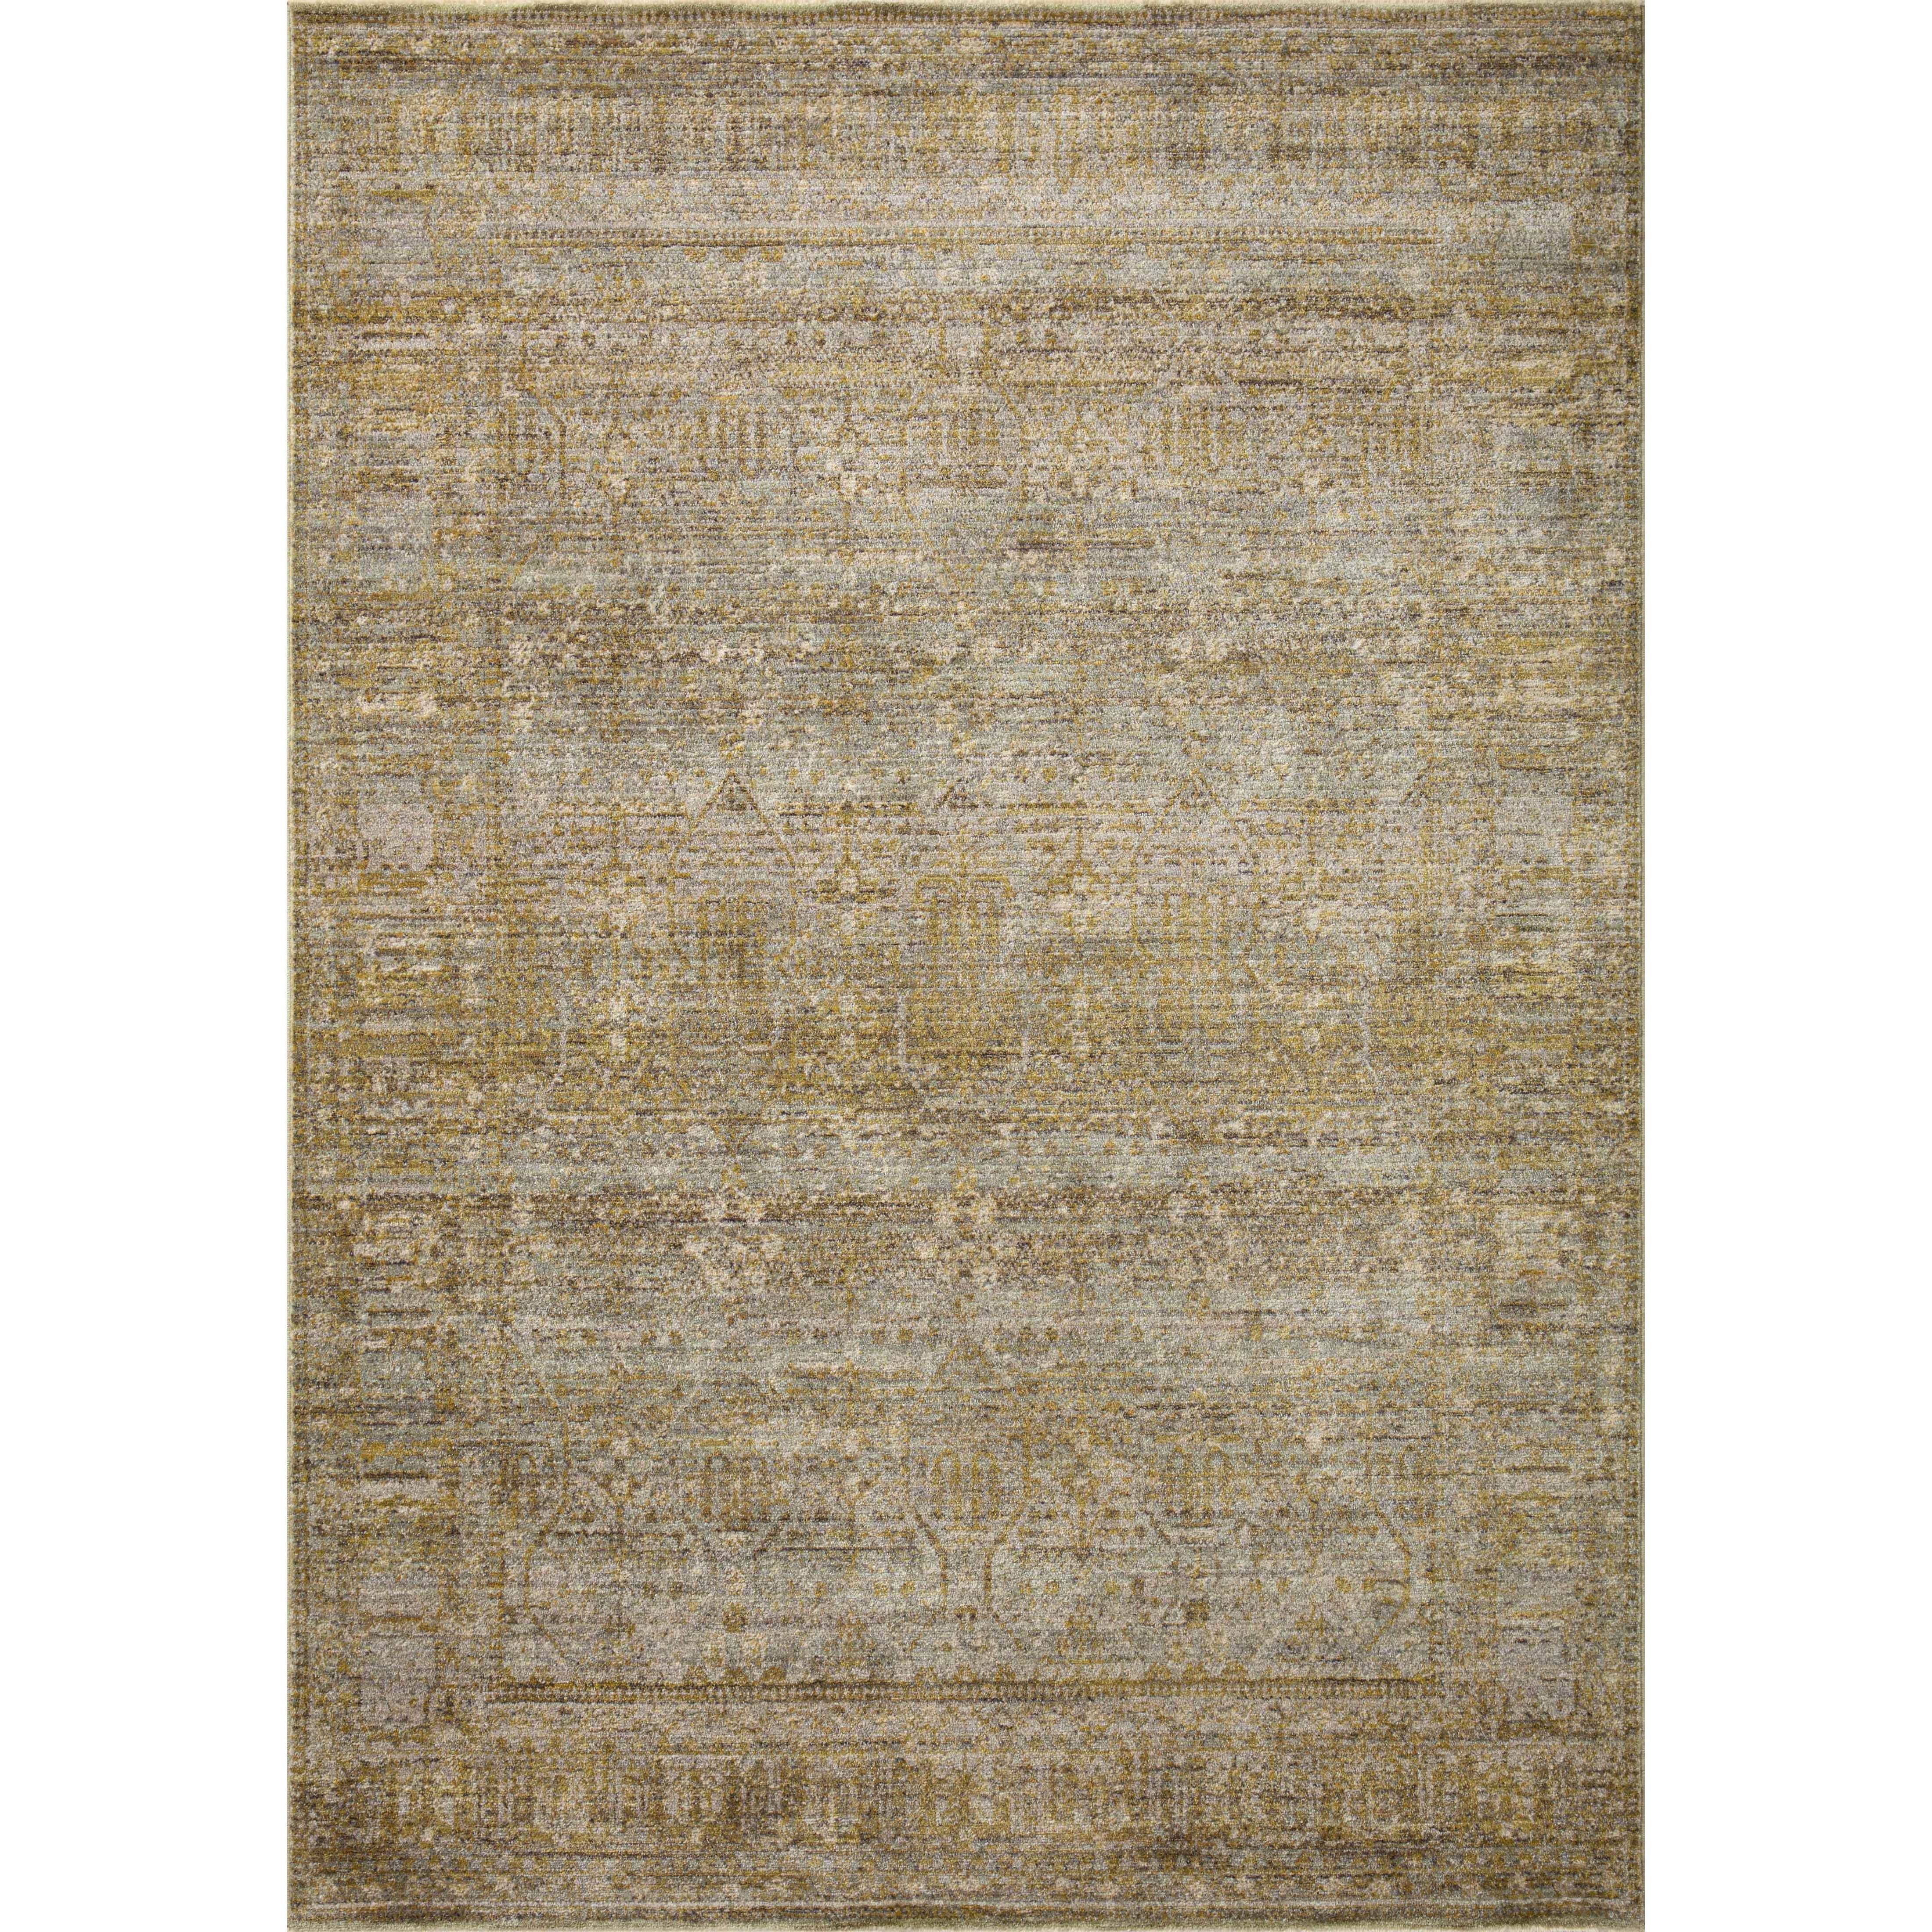 The Bradbury Dove / Gold Rug has small-scale motifs that, combined with the rug’s vibrant and varying colors, create eye-catching dimension in the room. Bradbury echoes the look of traditional rugs but comes alive in fresh, modern palettes that balance energetic bright tones with softer, distressed ones. Amethyst Home provides interior design, new construction, custom furniture, and area rugs in the Charlotte metro area.